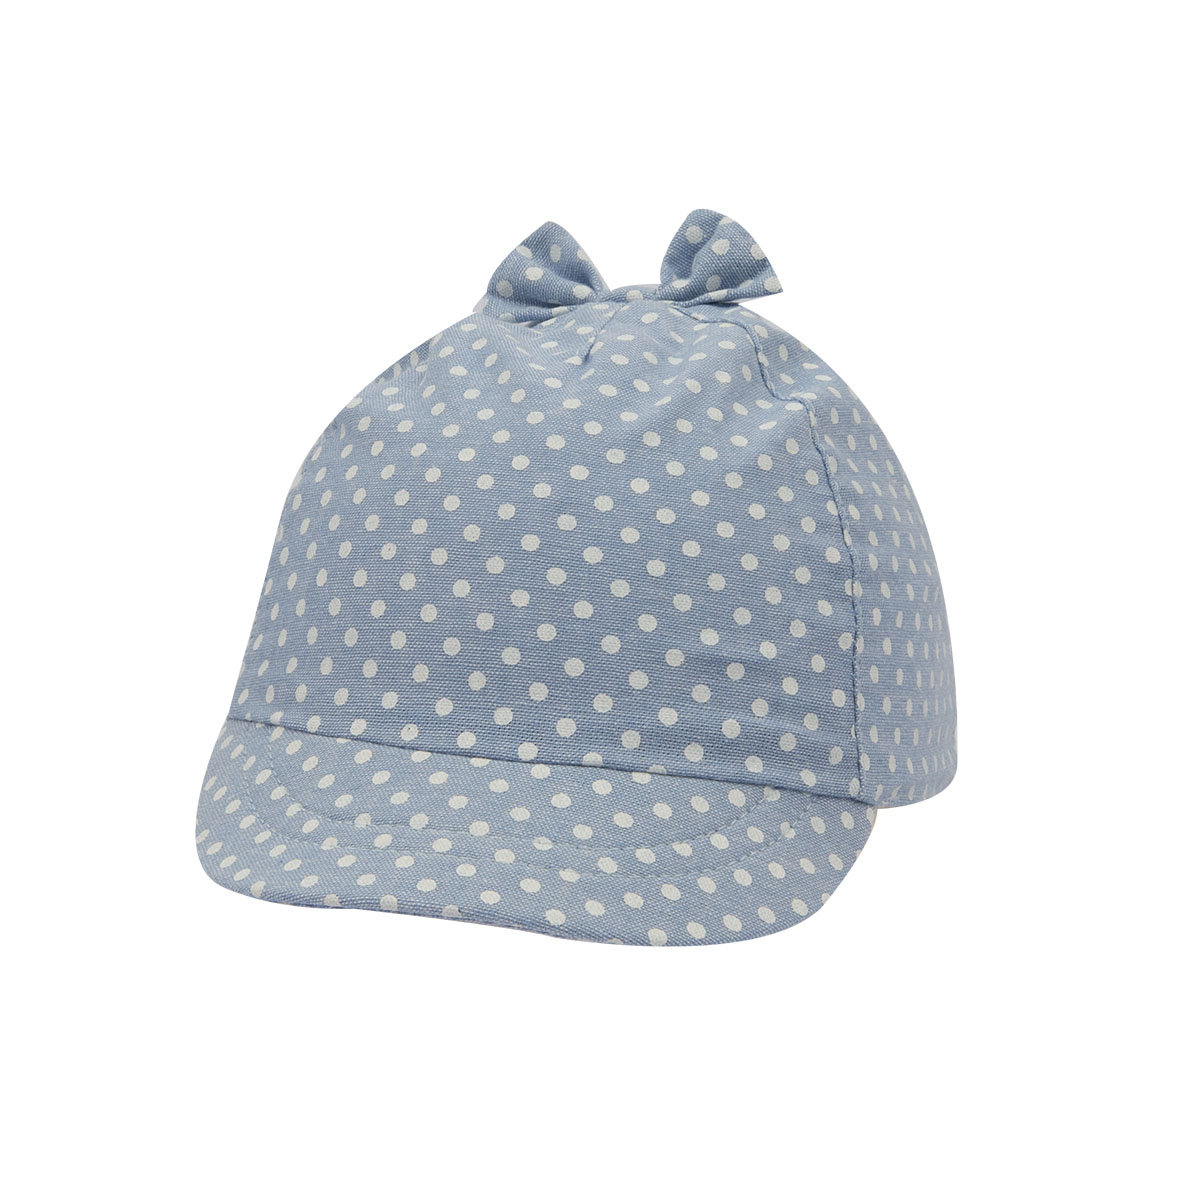 Mawi cappello denim chambray pois - Mawi